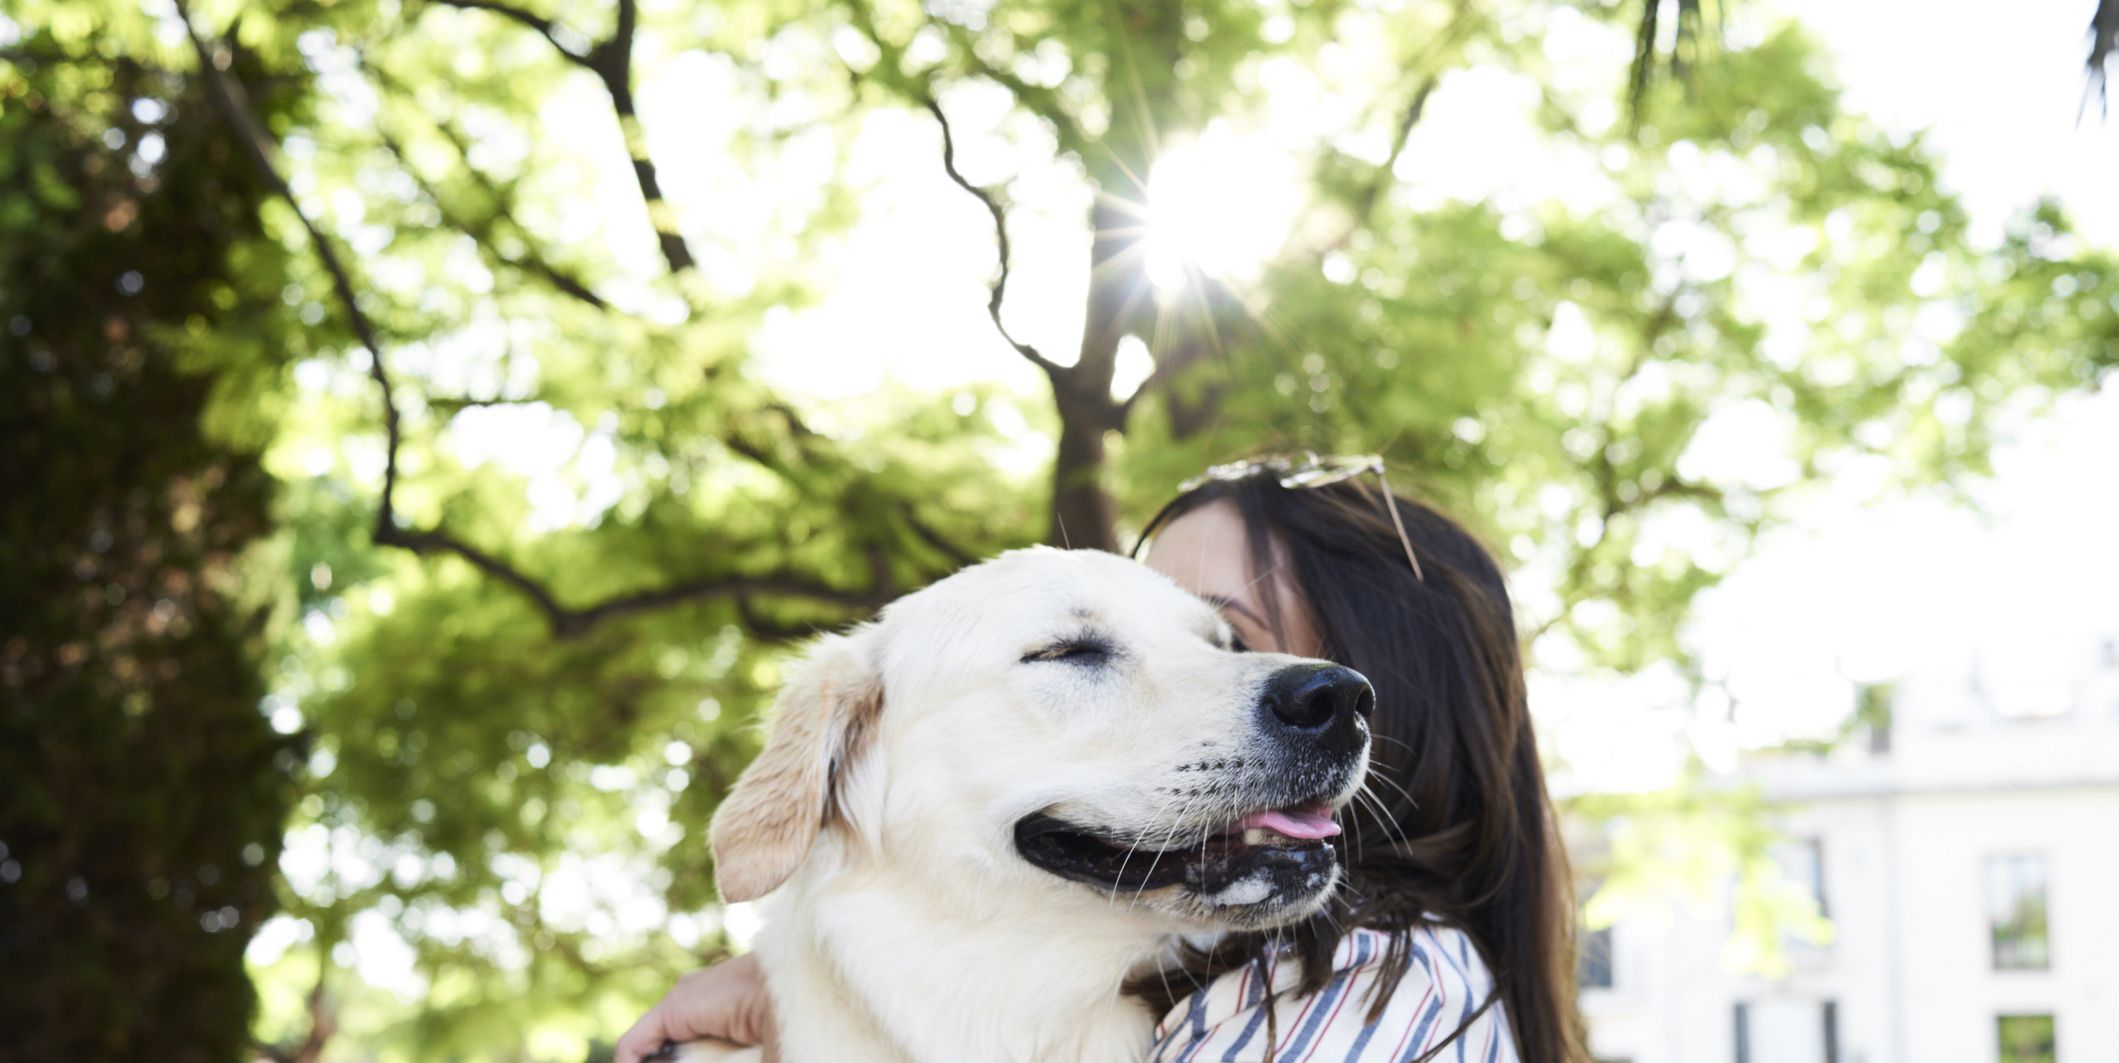 can dogs sense human emotions